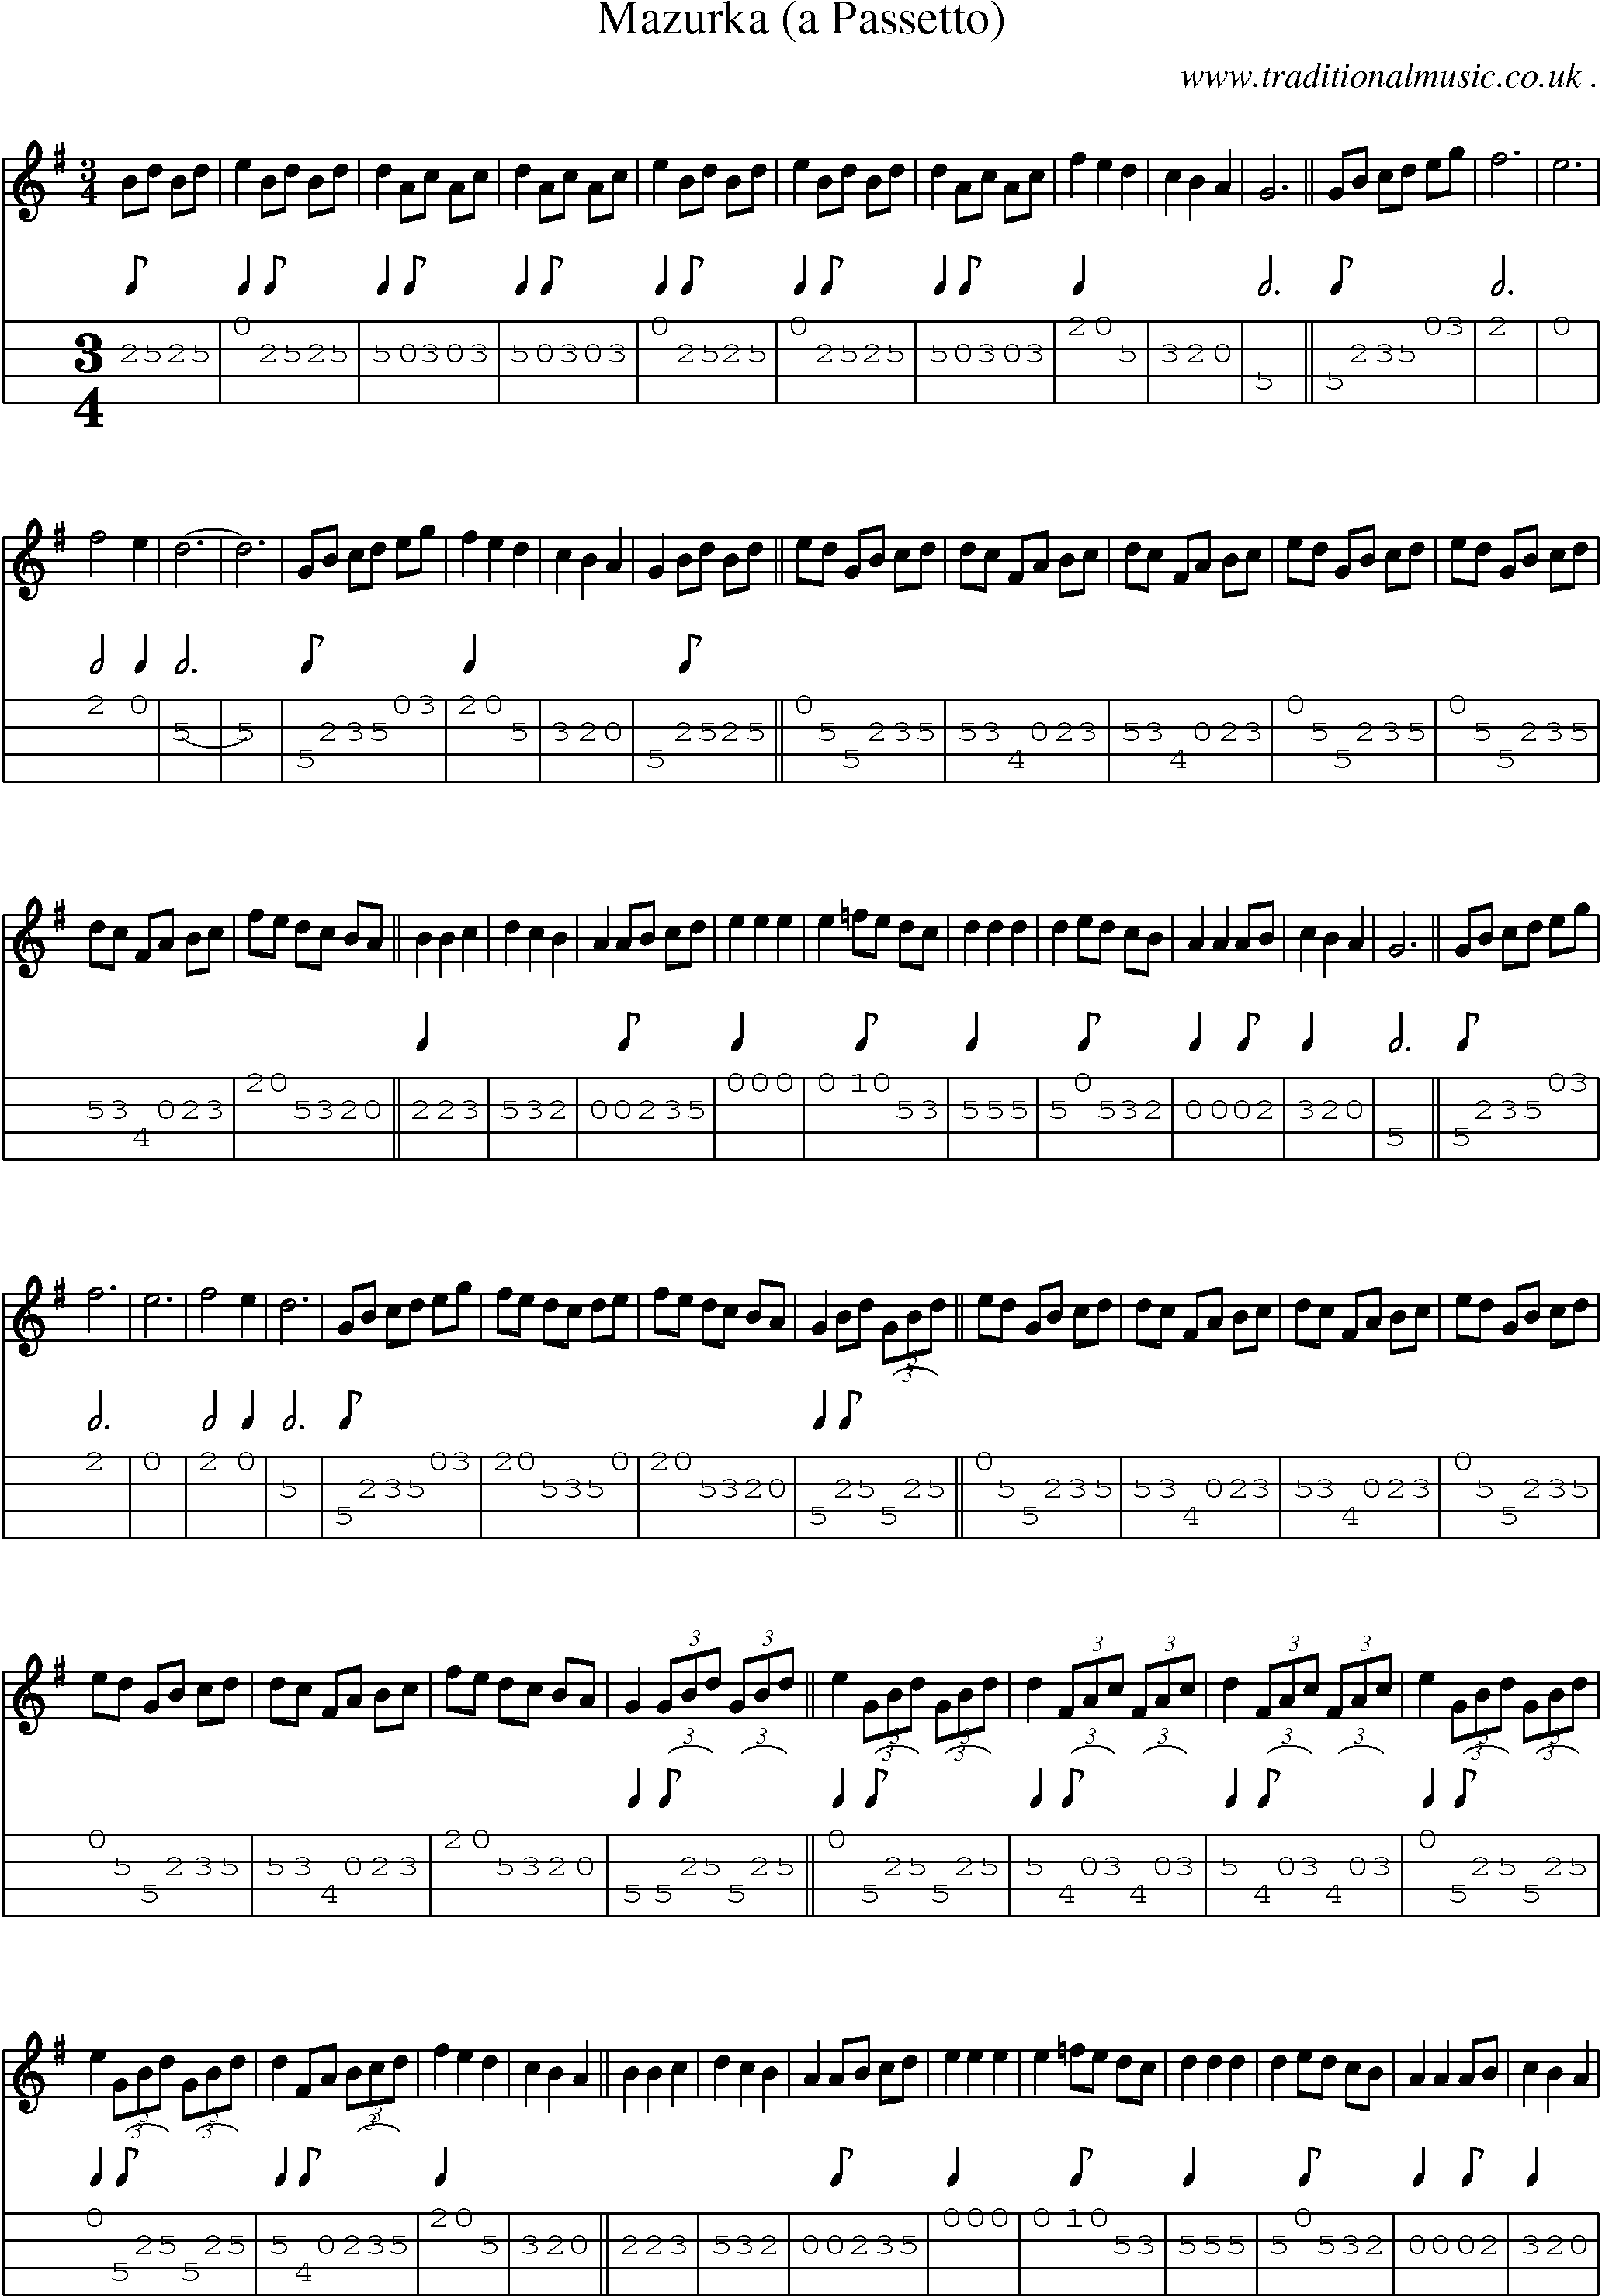 Sheet-Music and Mandolin Tabs for Mazurka (a Passetto)